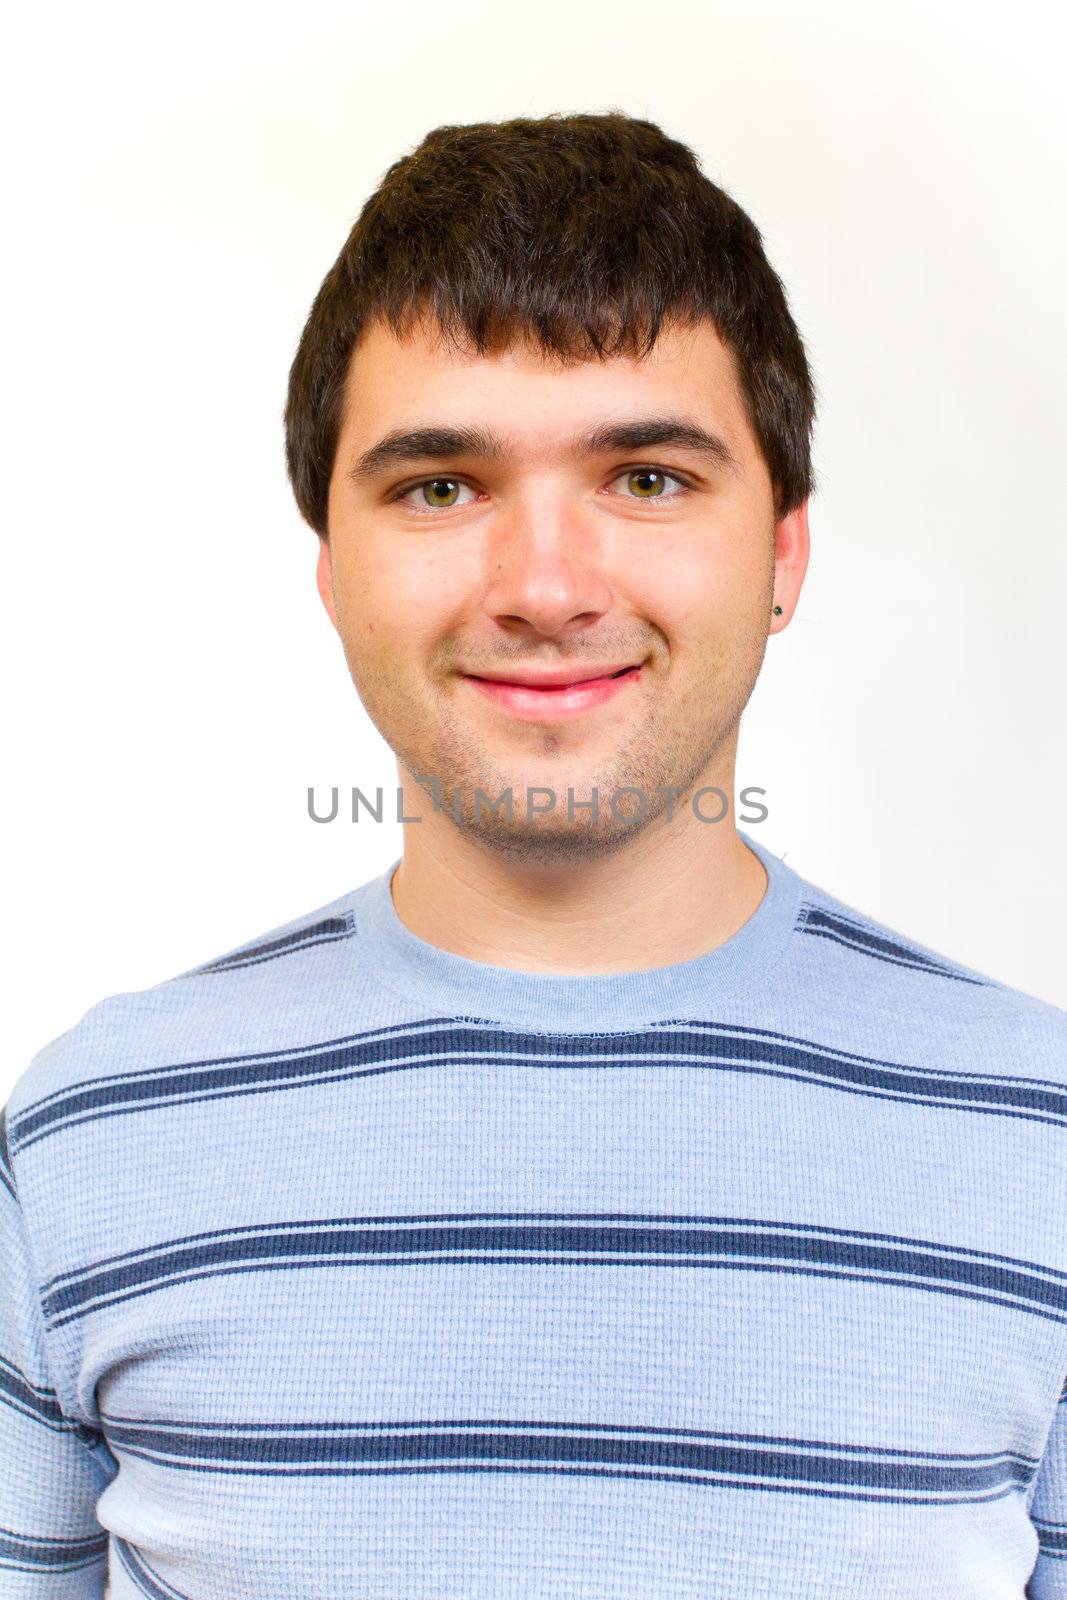 A portrait of a man in a striped sweater in the studio against an isolated white background.